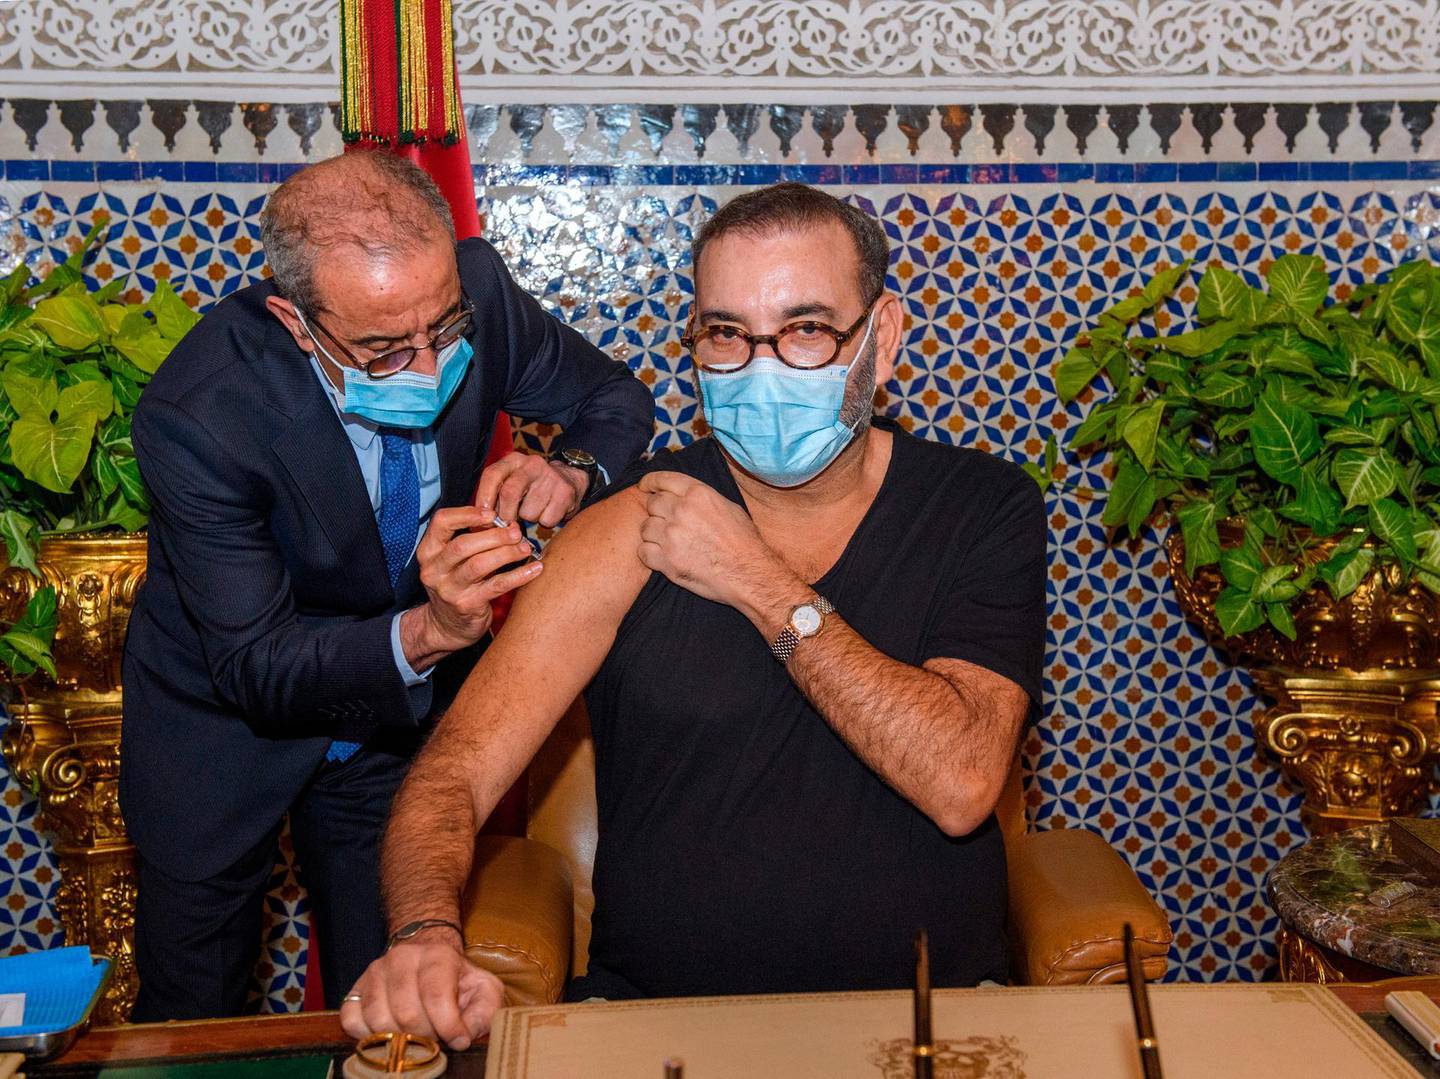 In this photo released by the Royal Palace, Morocco's King Mohammed VI, right, receives the COVID-19 vaccine at the Royal Palace in Fes, as he launches his country's coronavirus vaccination campaign, Thursday Jan. 28, 2021. The North African kingdom received its first shipments of vaccine doses in recent days from China's Sinopharm and Anglo-Swedish drug maker AstraZeneca. (Moroccan Royal Palace via AP)